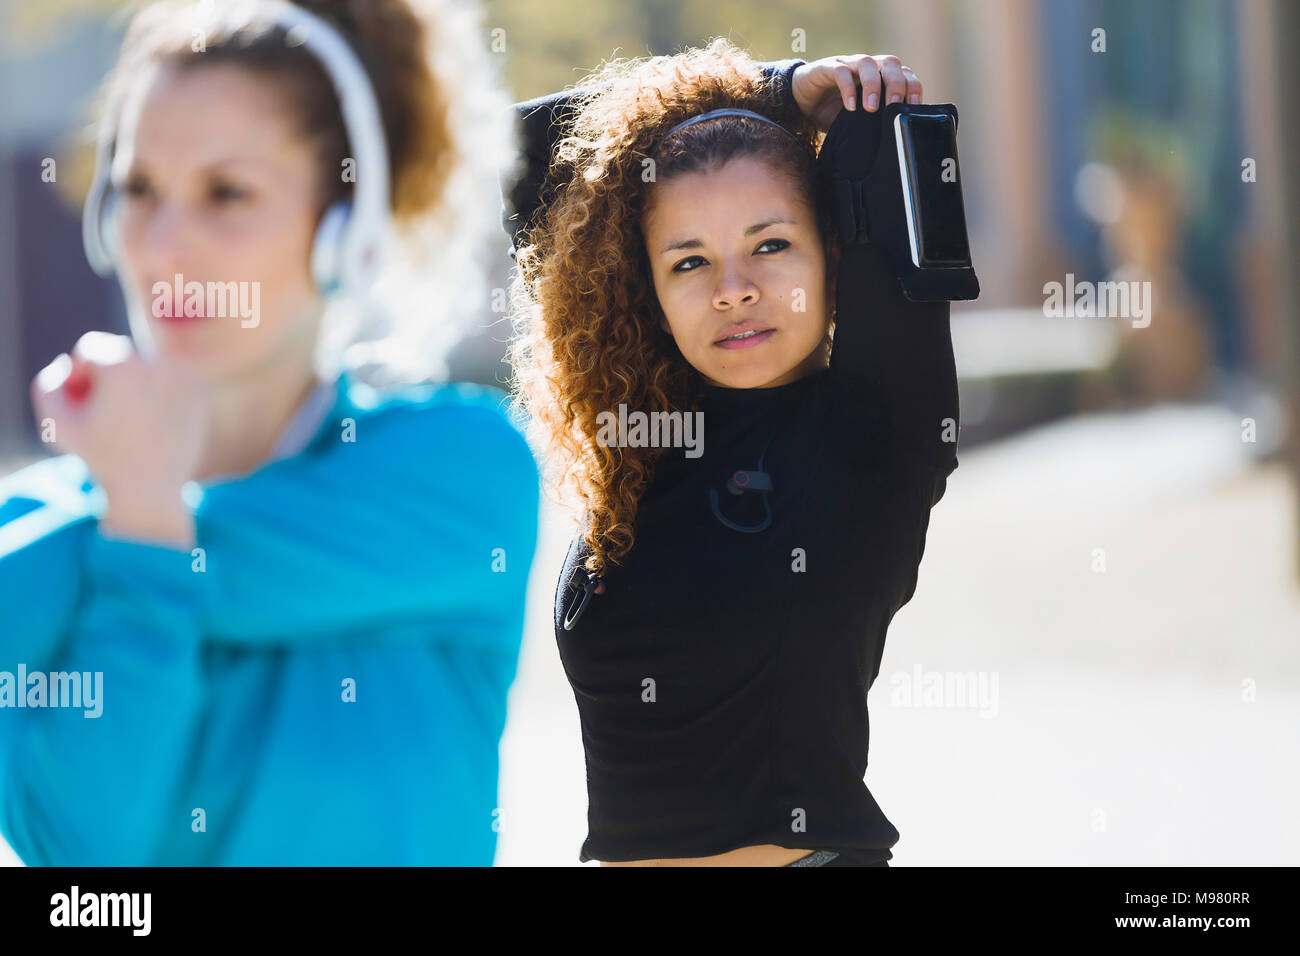 Two focused sportive young women stretching listening to music Stock Photo